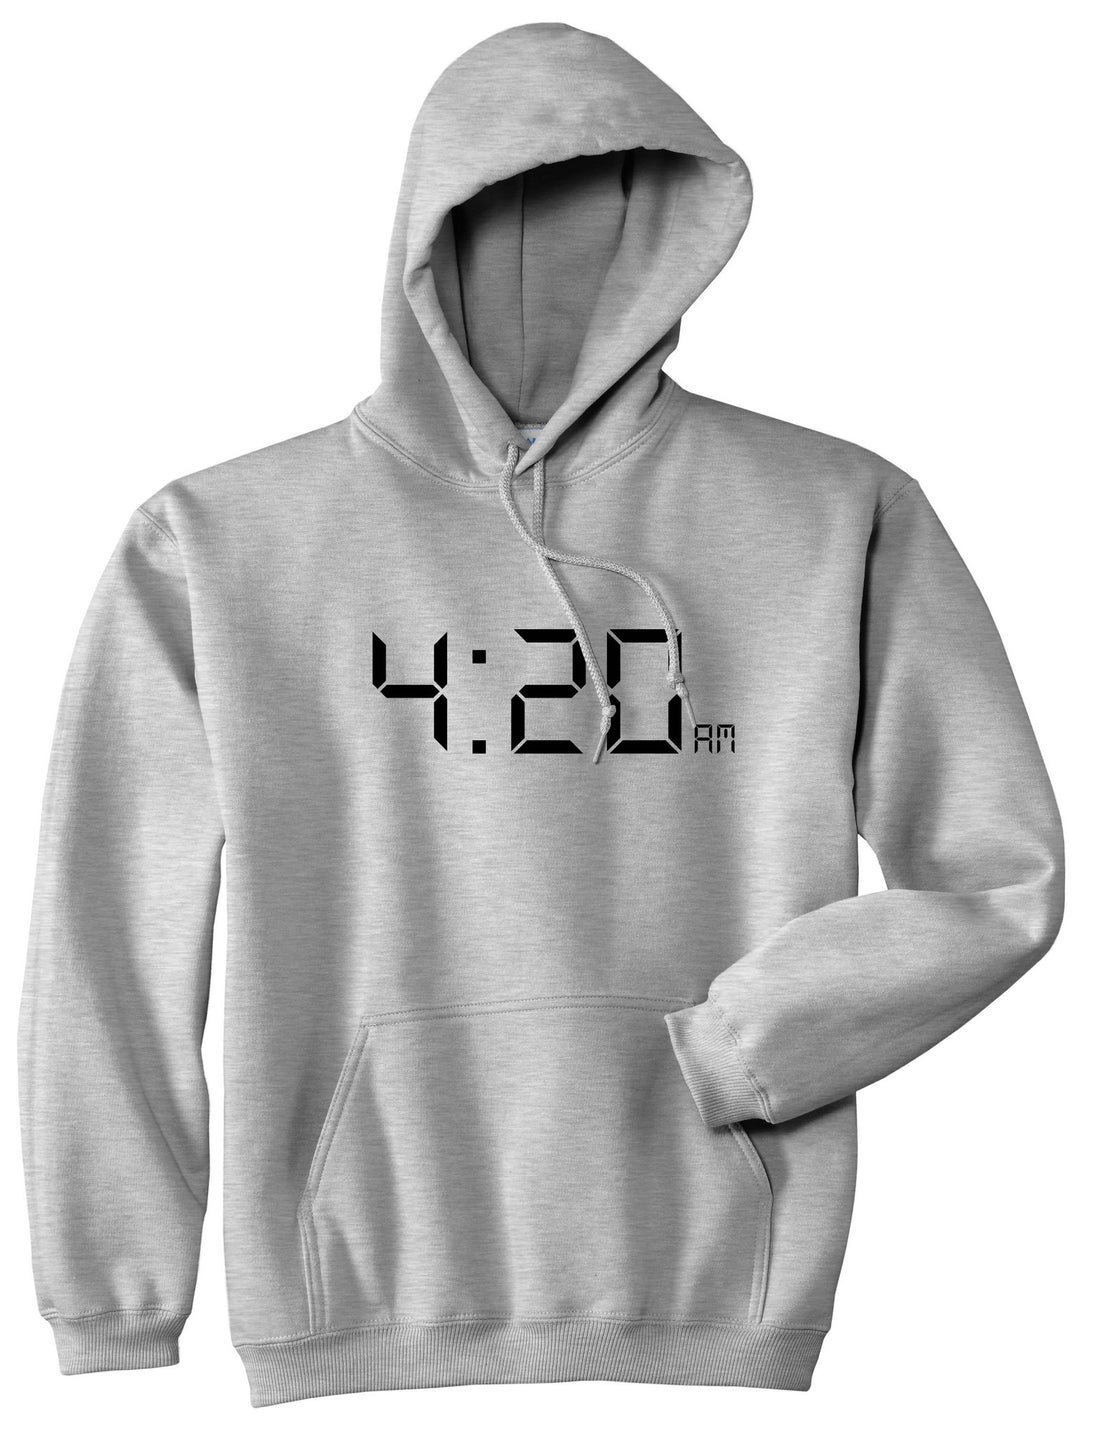 420 Time Weed Somker Pullover Hoodie in Grey By Kings Of NY